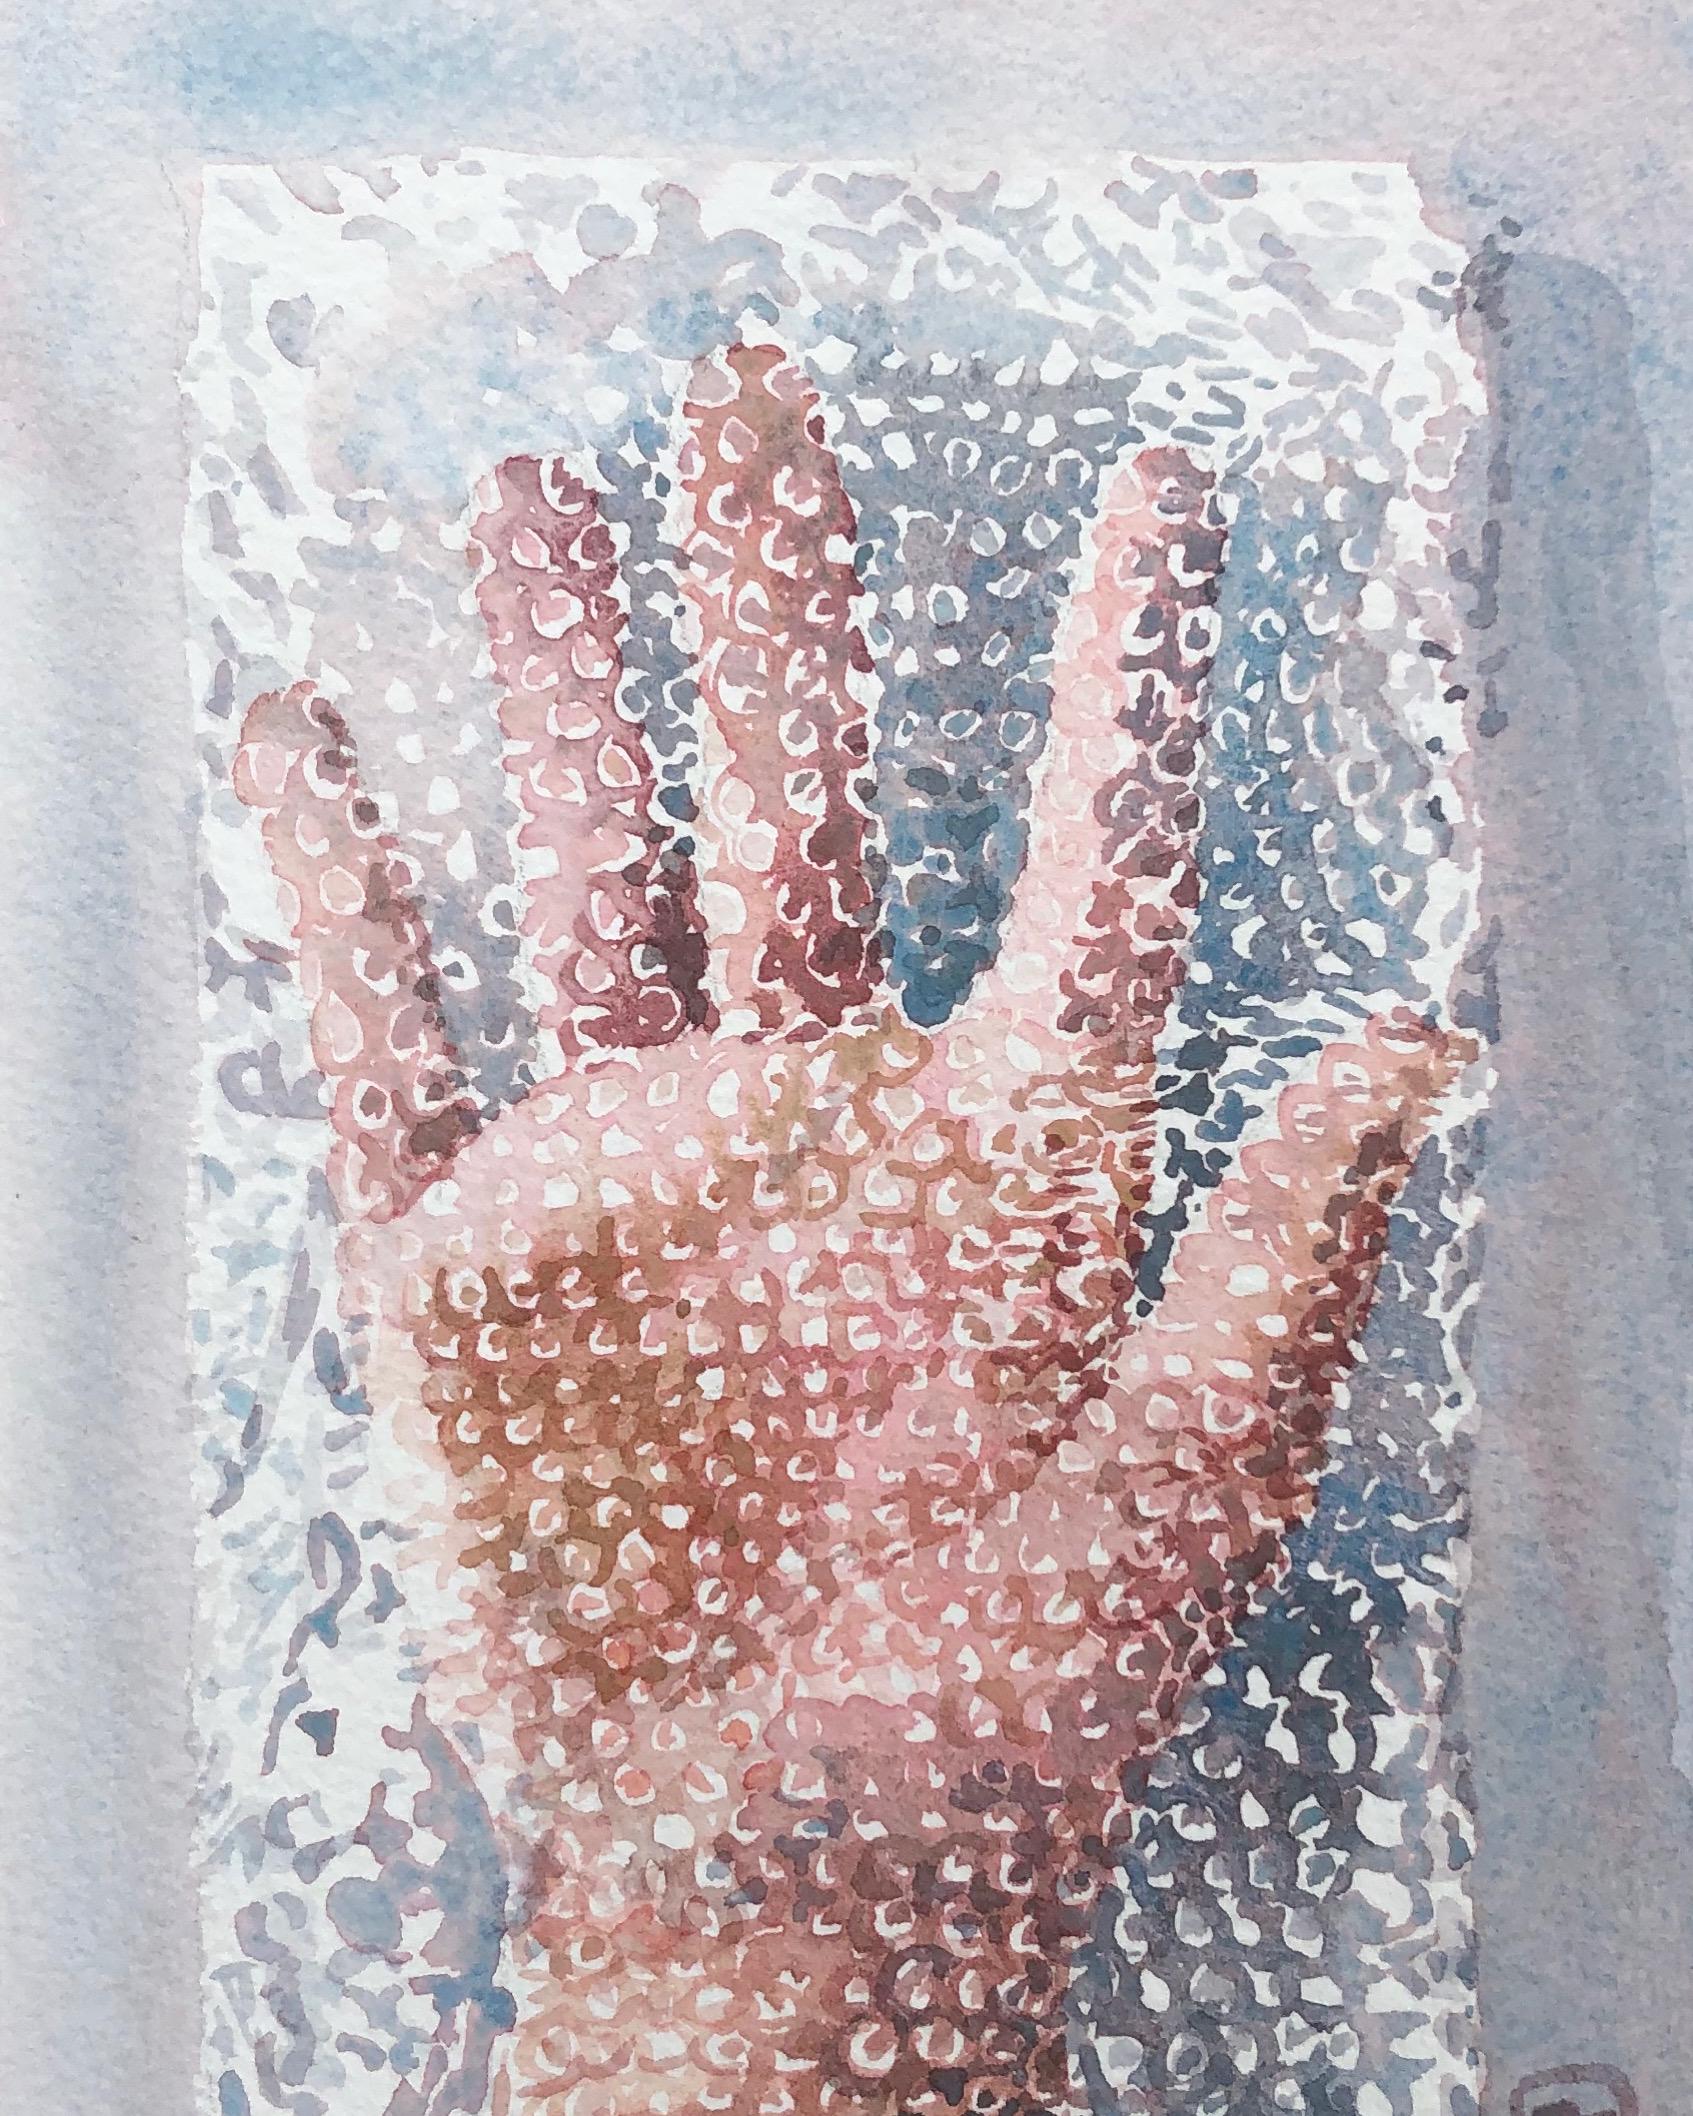 Fleur Thesmar Still-Life - "POOR ME", watercolor, hand, bubble wrap, safety, protection, isolated, virus